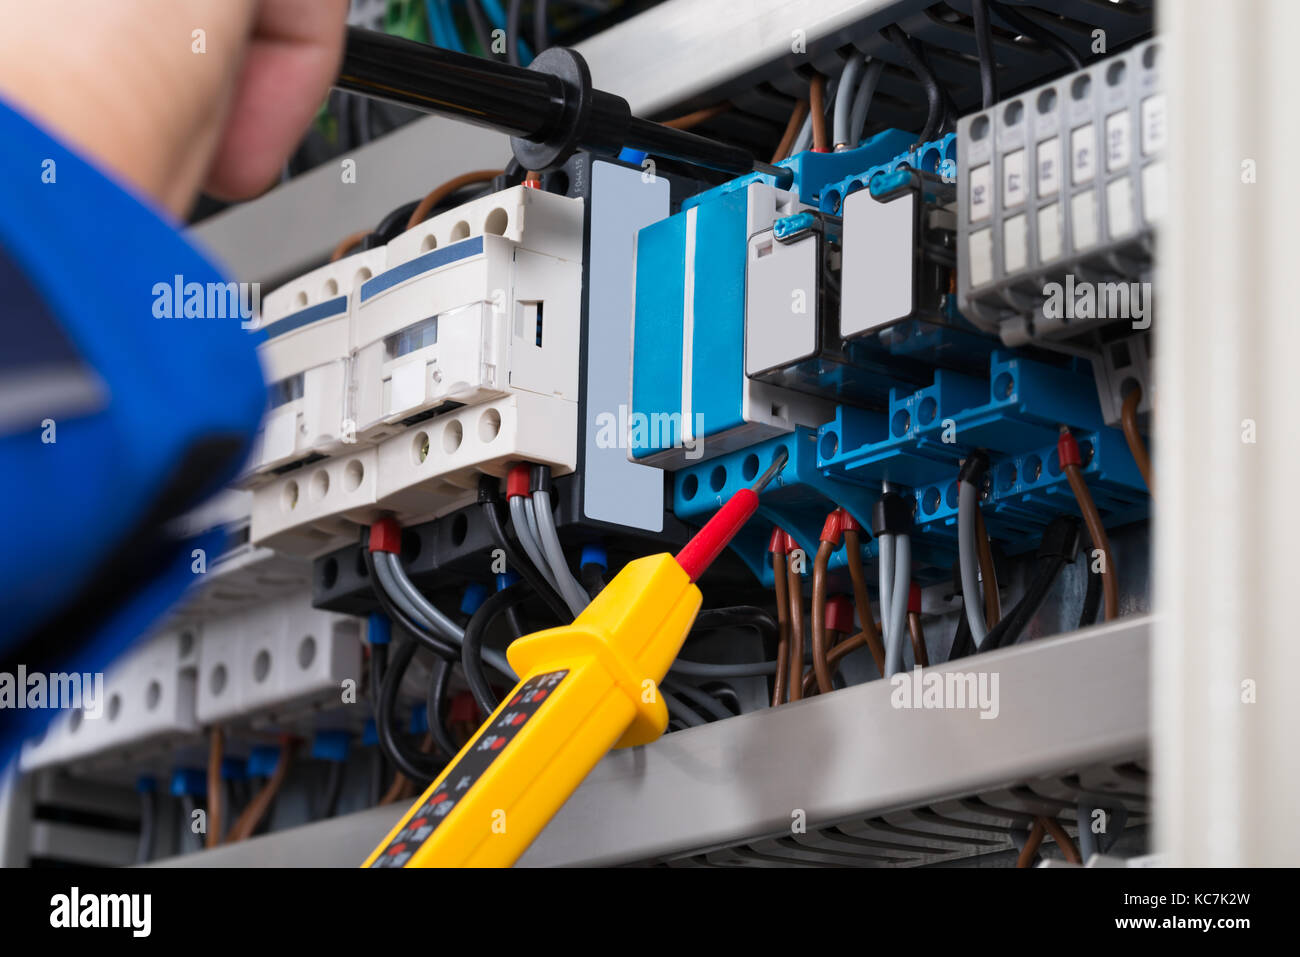 Male Electrician Examining Fusebox With Voltage Tester Stock Photo